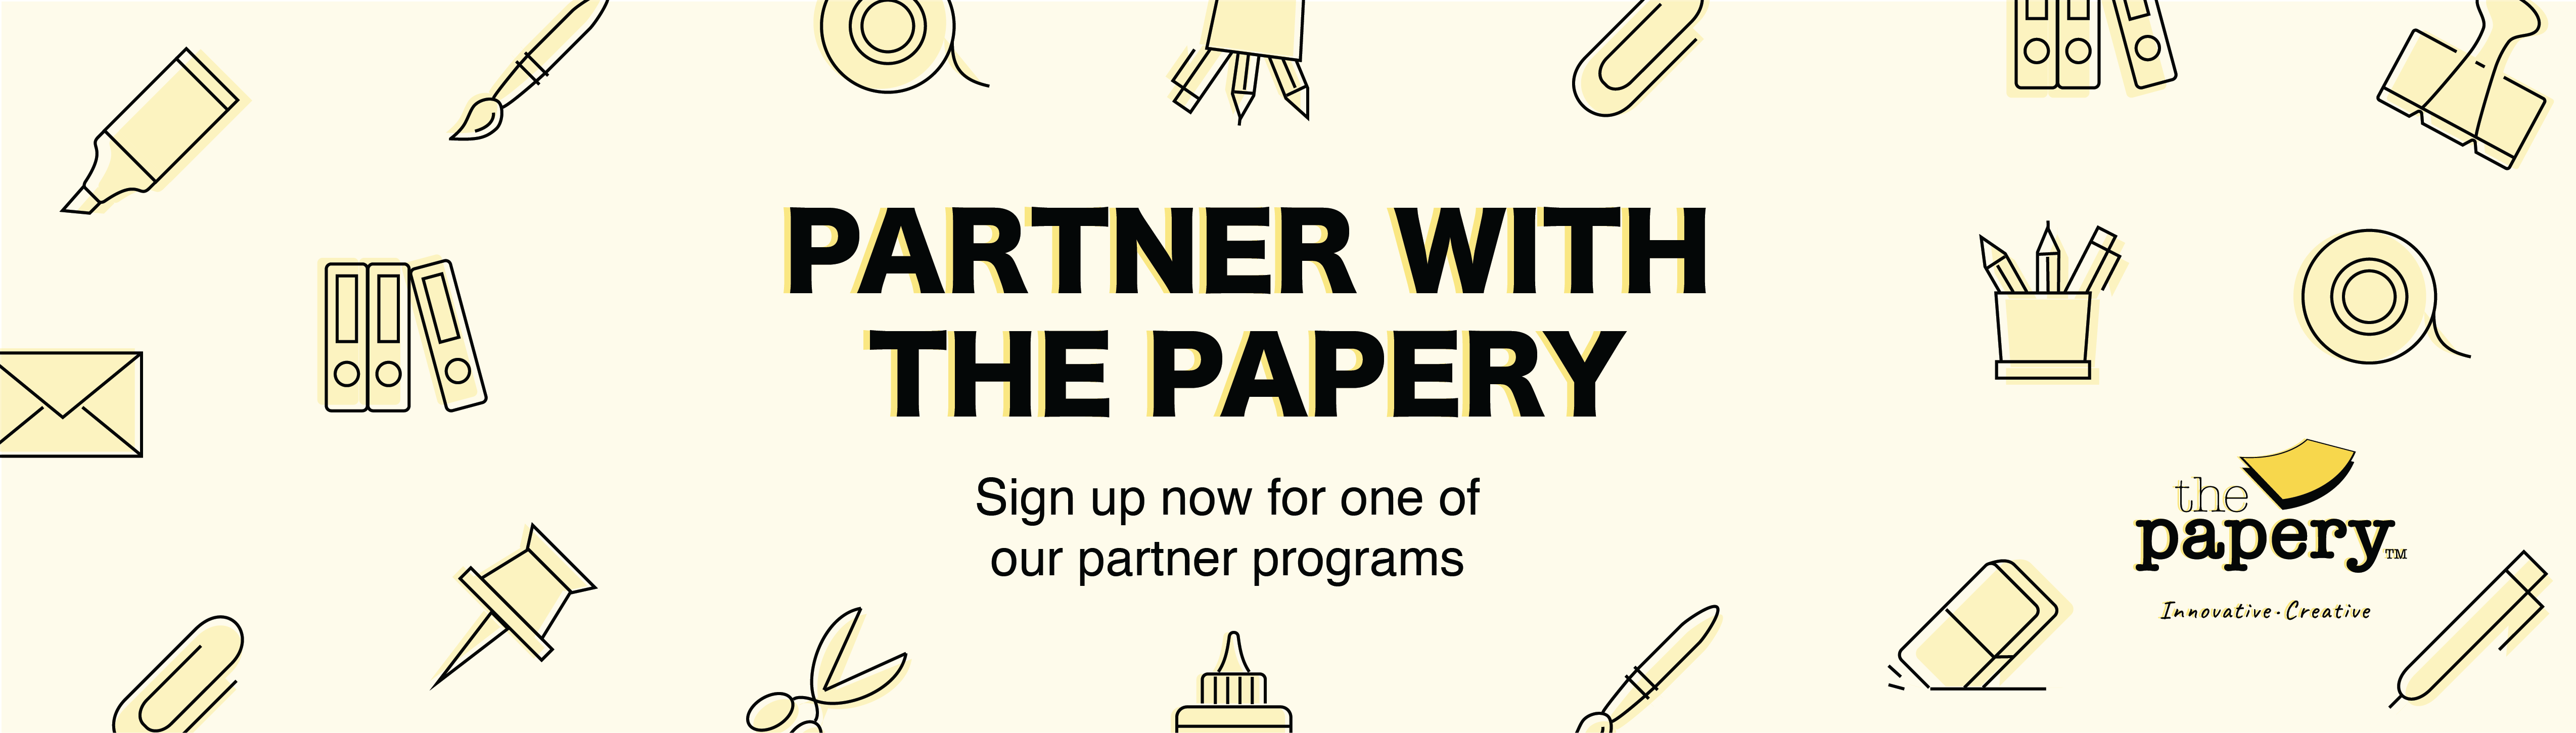 Image shows a banner for the reseller partnership